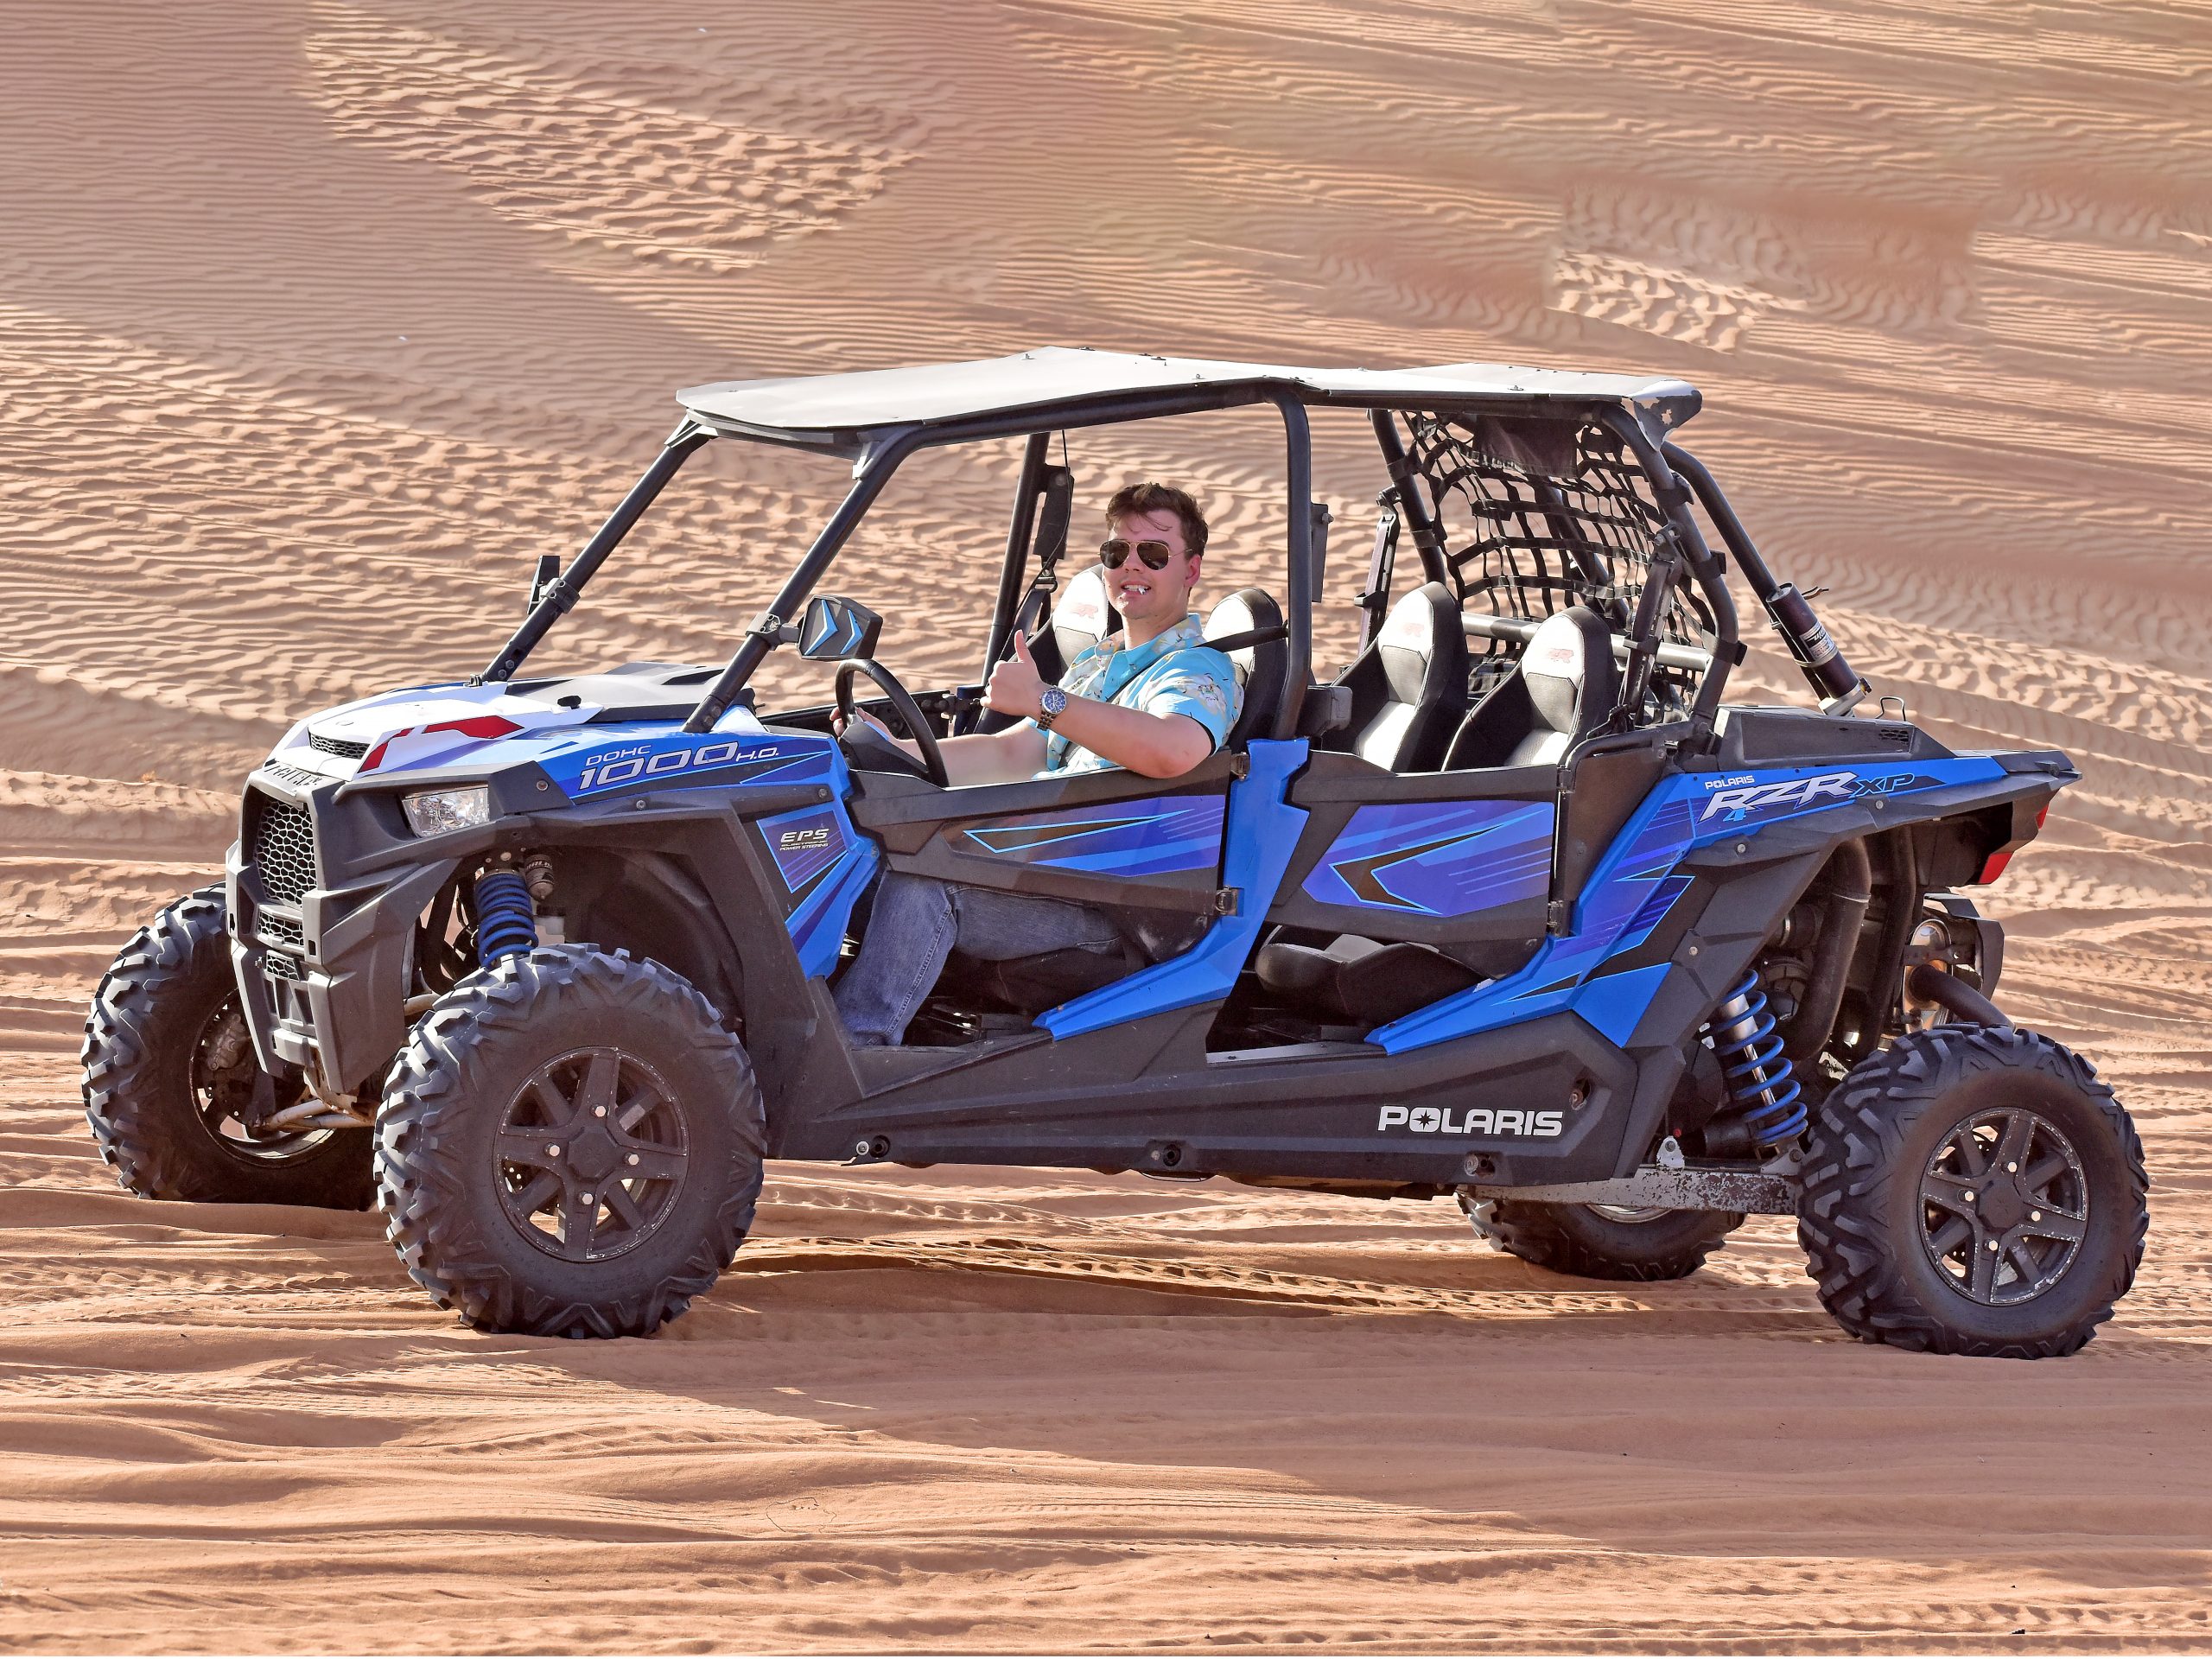 Read more about the article 5 Top Desert Adventure Activities to Do in Dubai